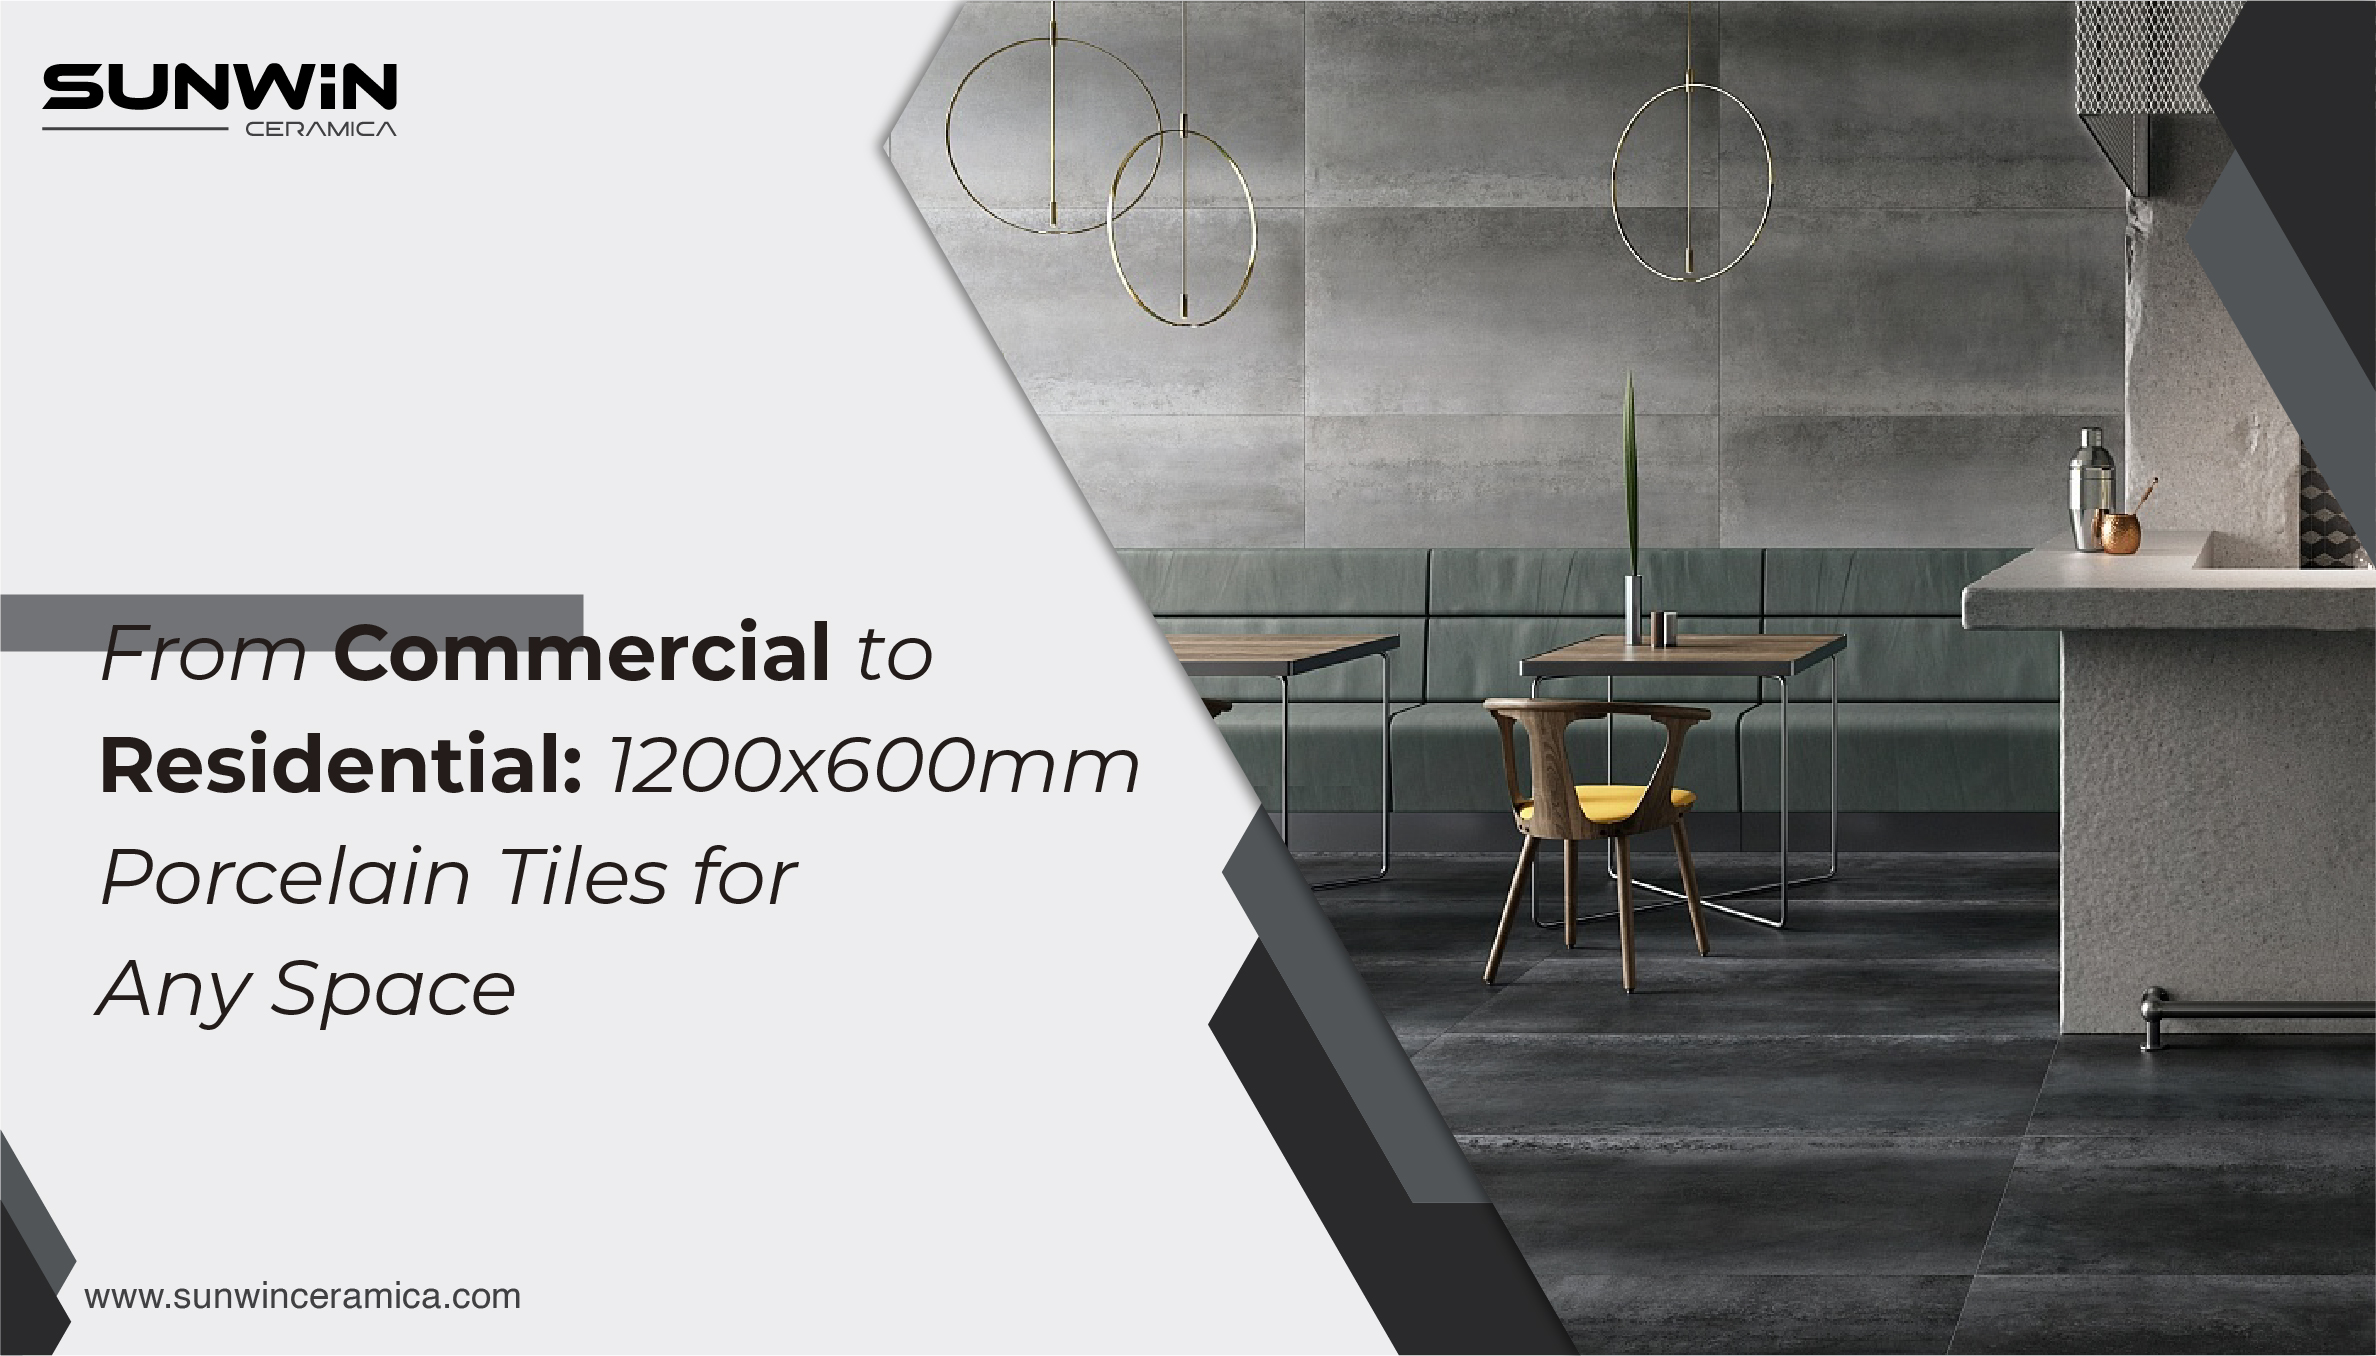 From Commercial to Residential: 1200x600 Porcelain Tiles for Any Space